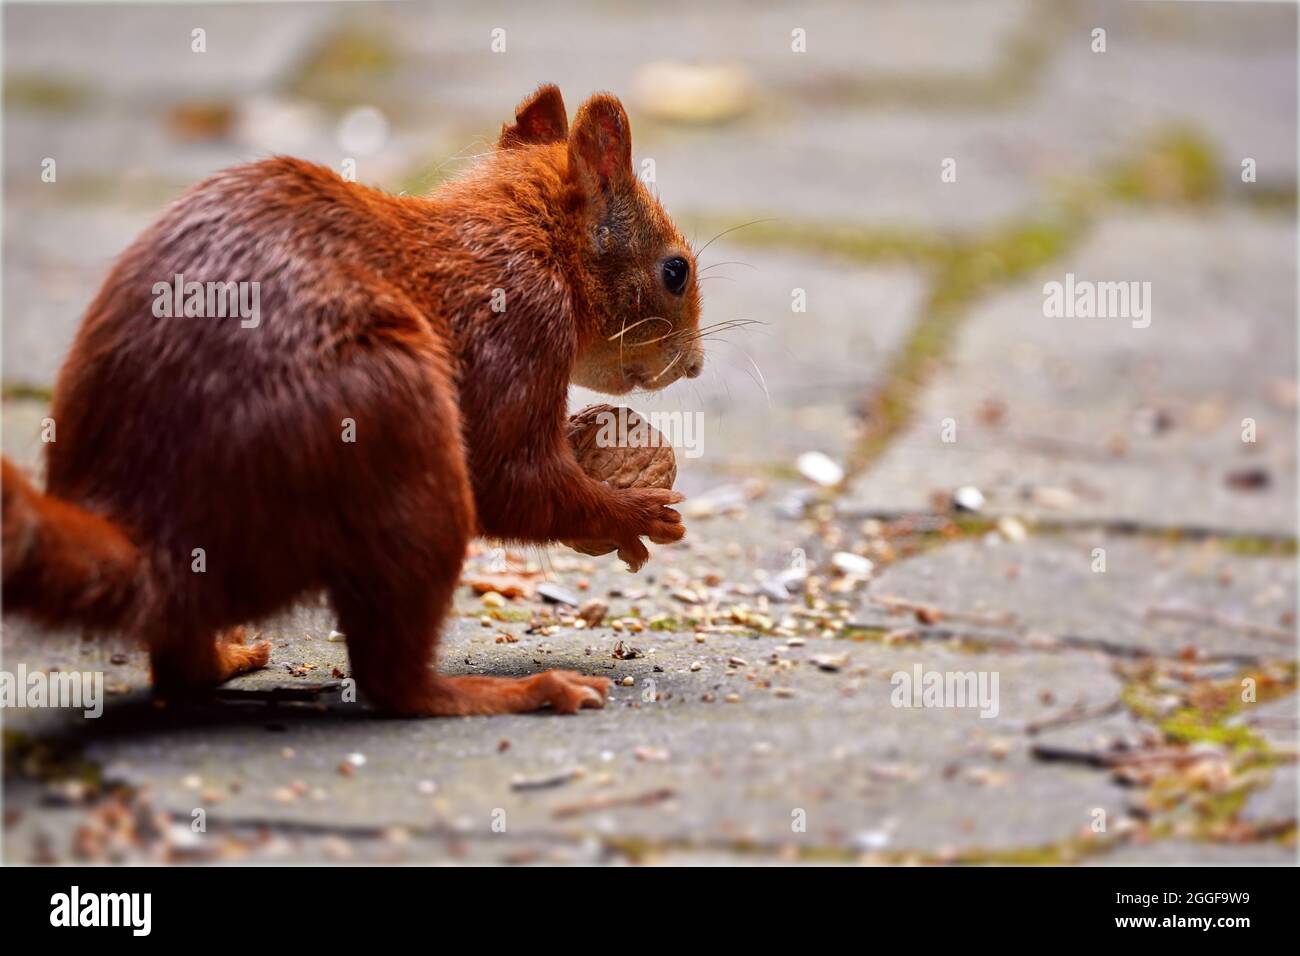 Closeup of Squirrel, Sciurus vulgaris, with a walnut in its small paws on a on a paved terrace, shallow depth of field Stock Photo